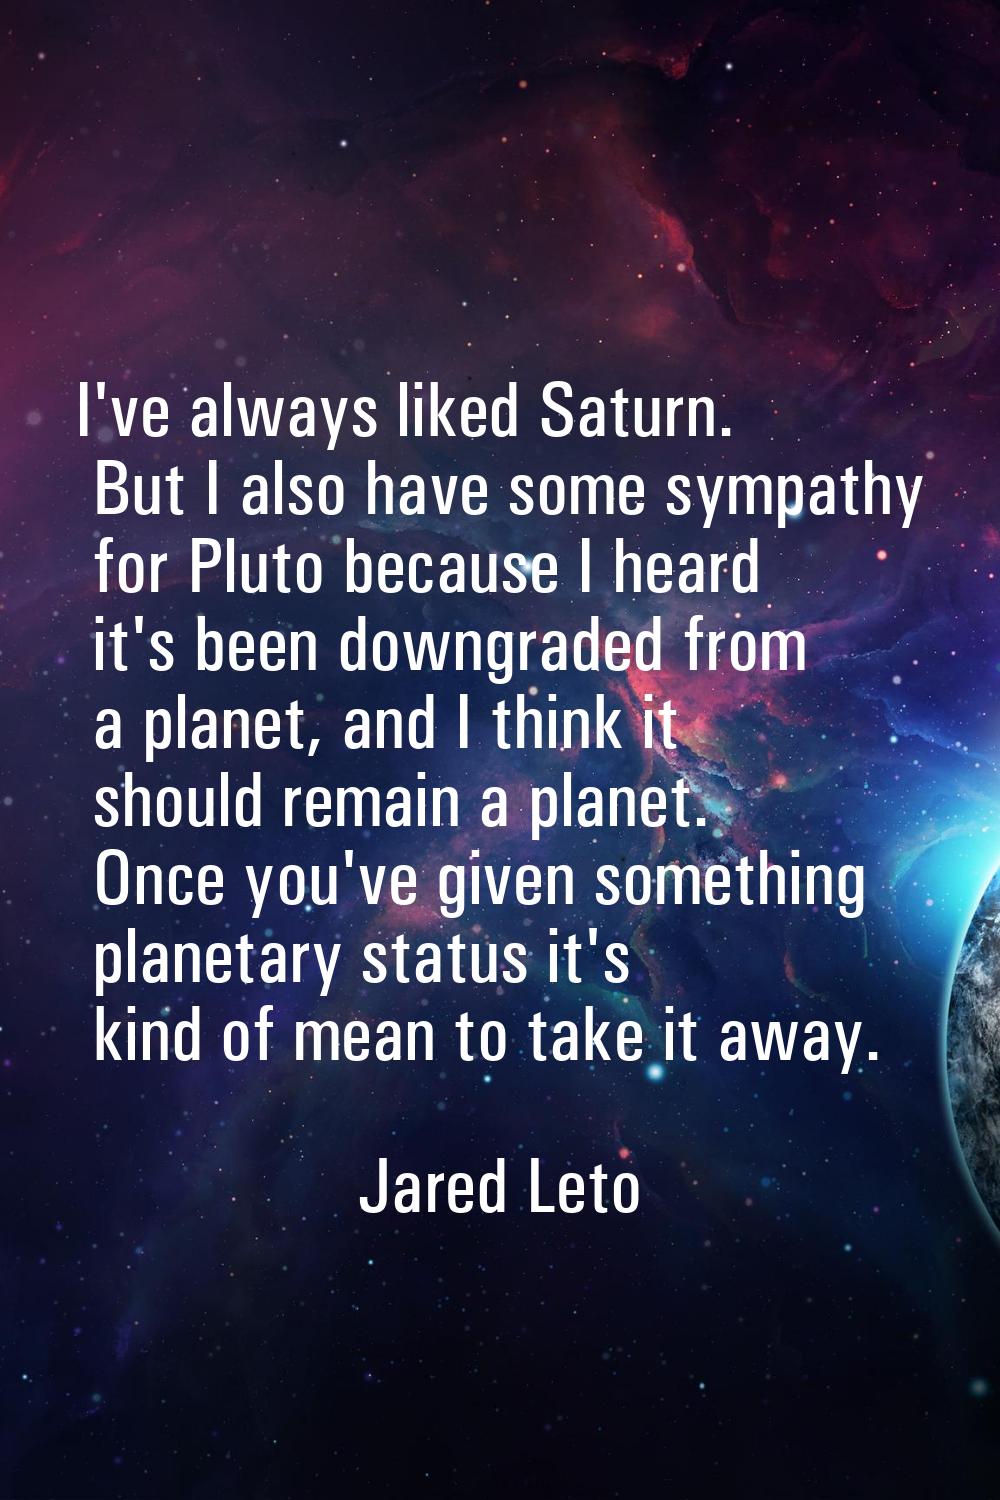 I've always liked Saturn. But I also have some sympathy for Pluto because I heard it's been downgra